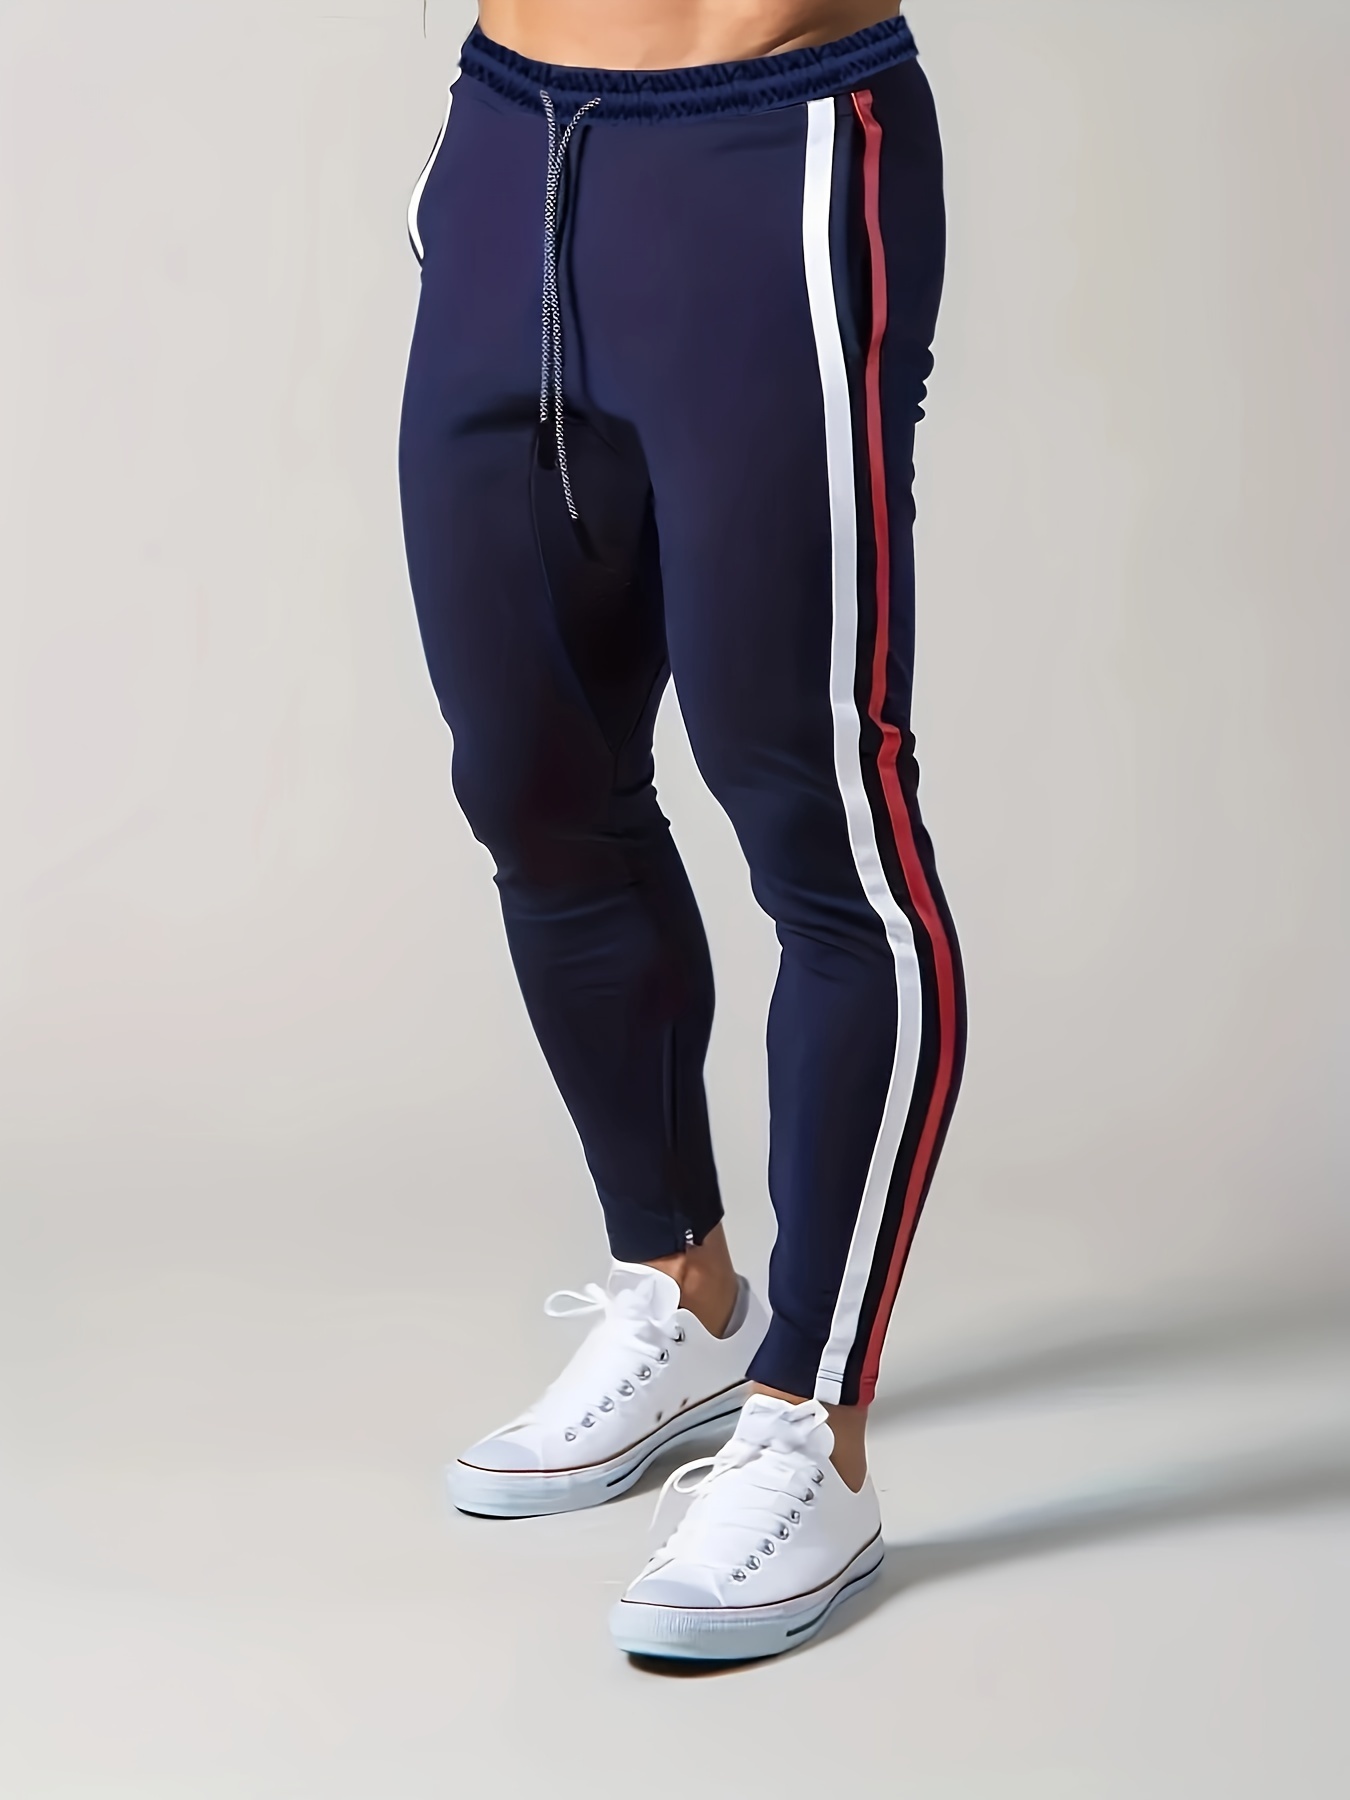 Navy Blue and White Horizontal Stripes Leggings for Sale by